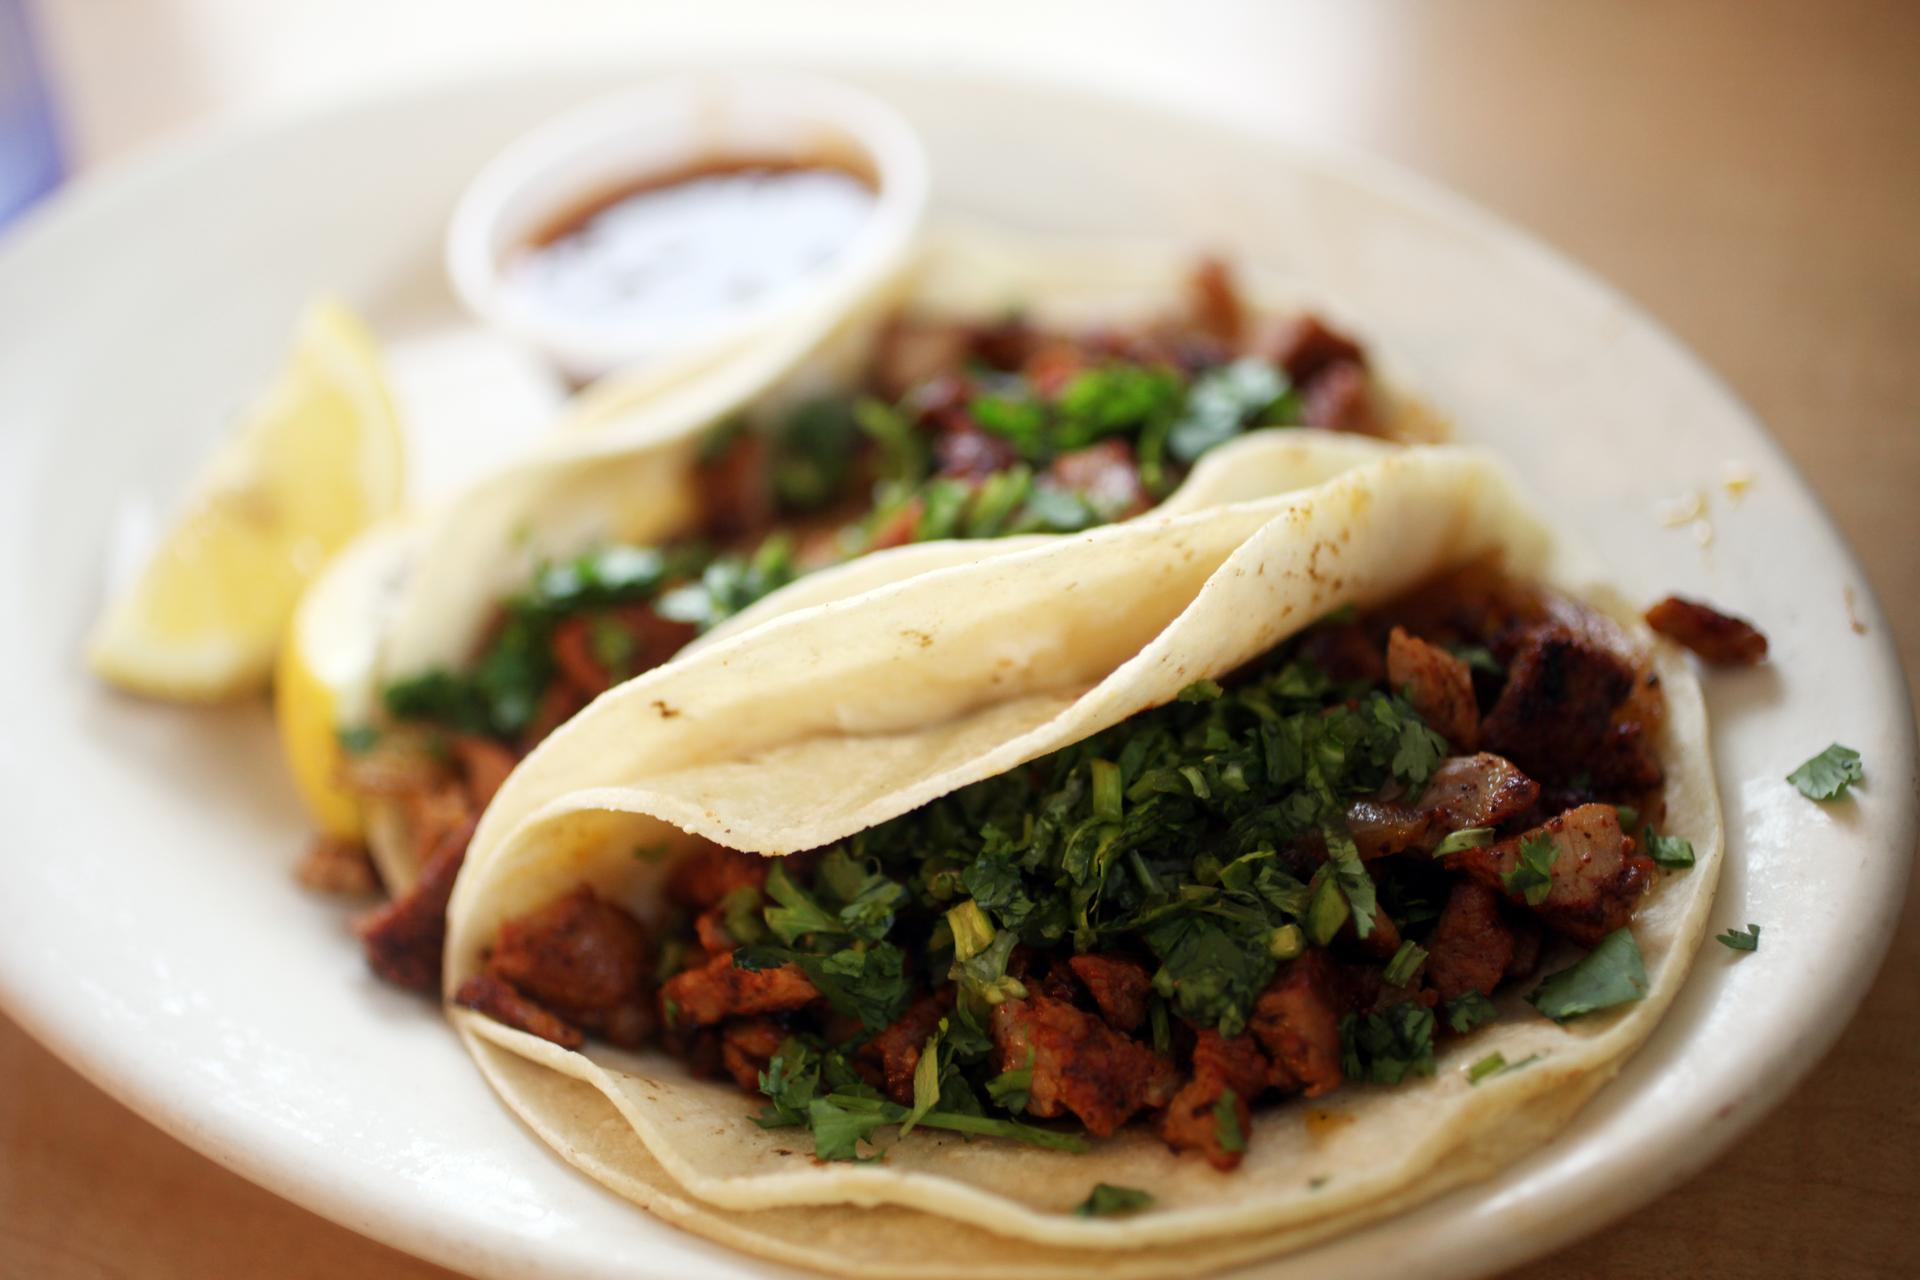 Tacos al pastor from Carmela's Mexican Restaurant in Beaumont, Texas.